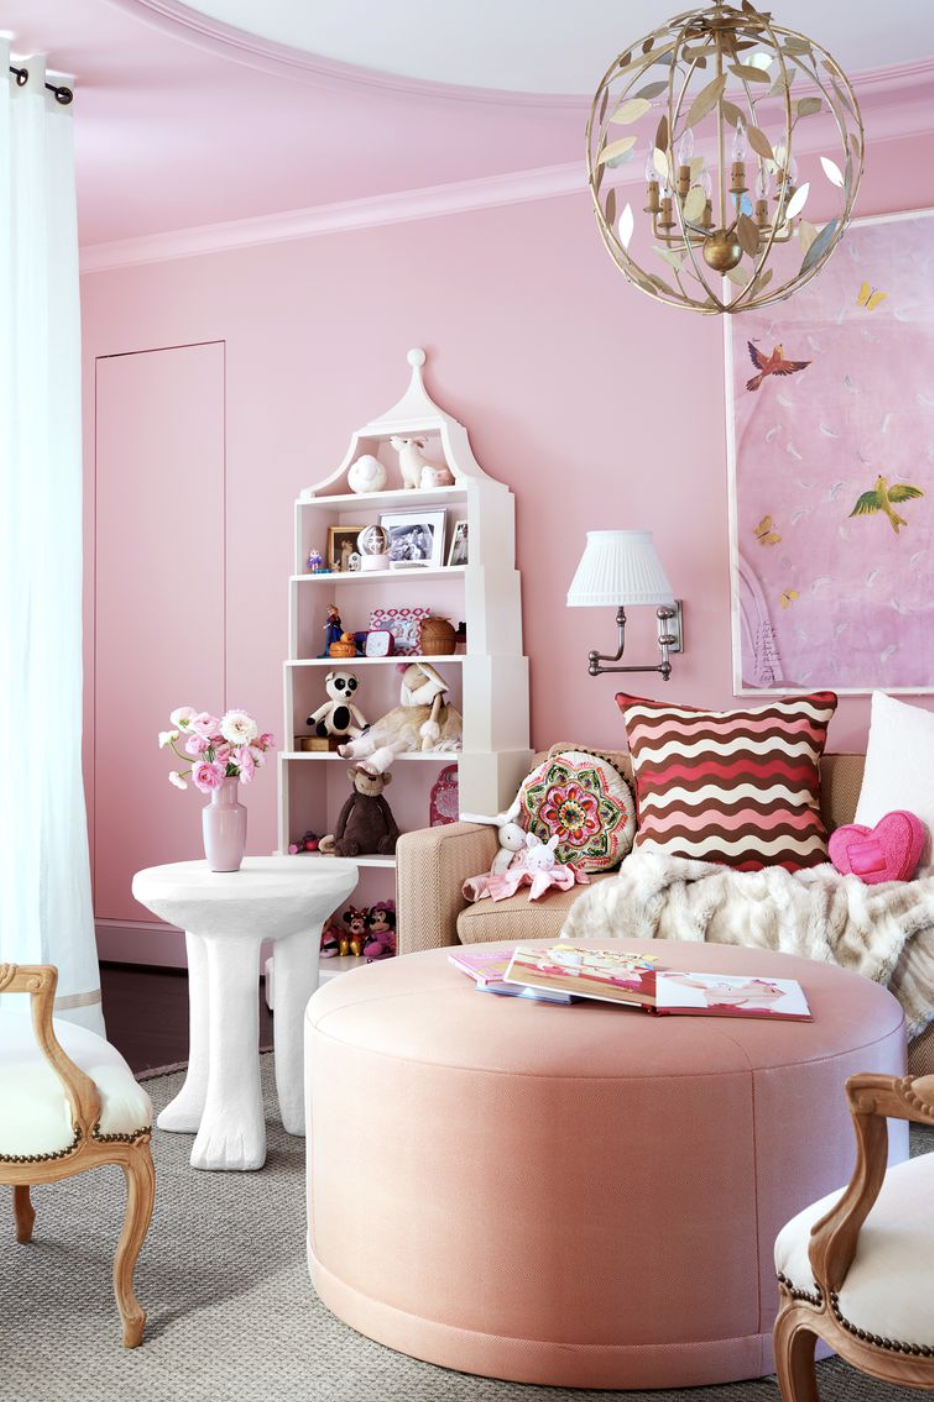 Kids Room Paint Bright Pink 1654804920 